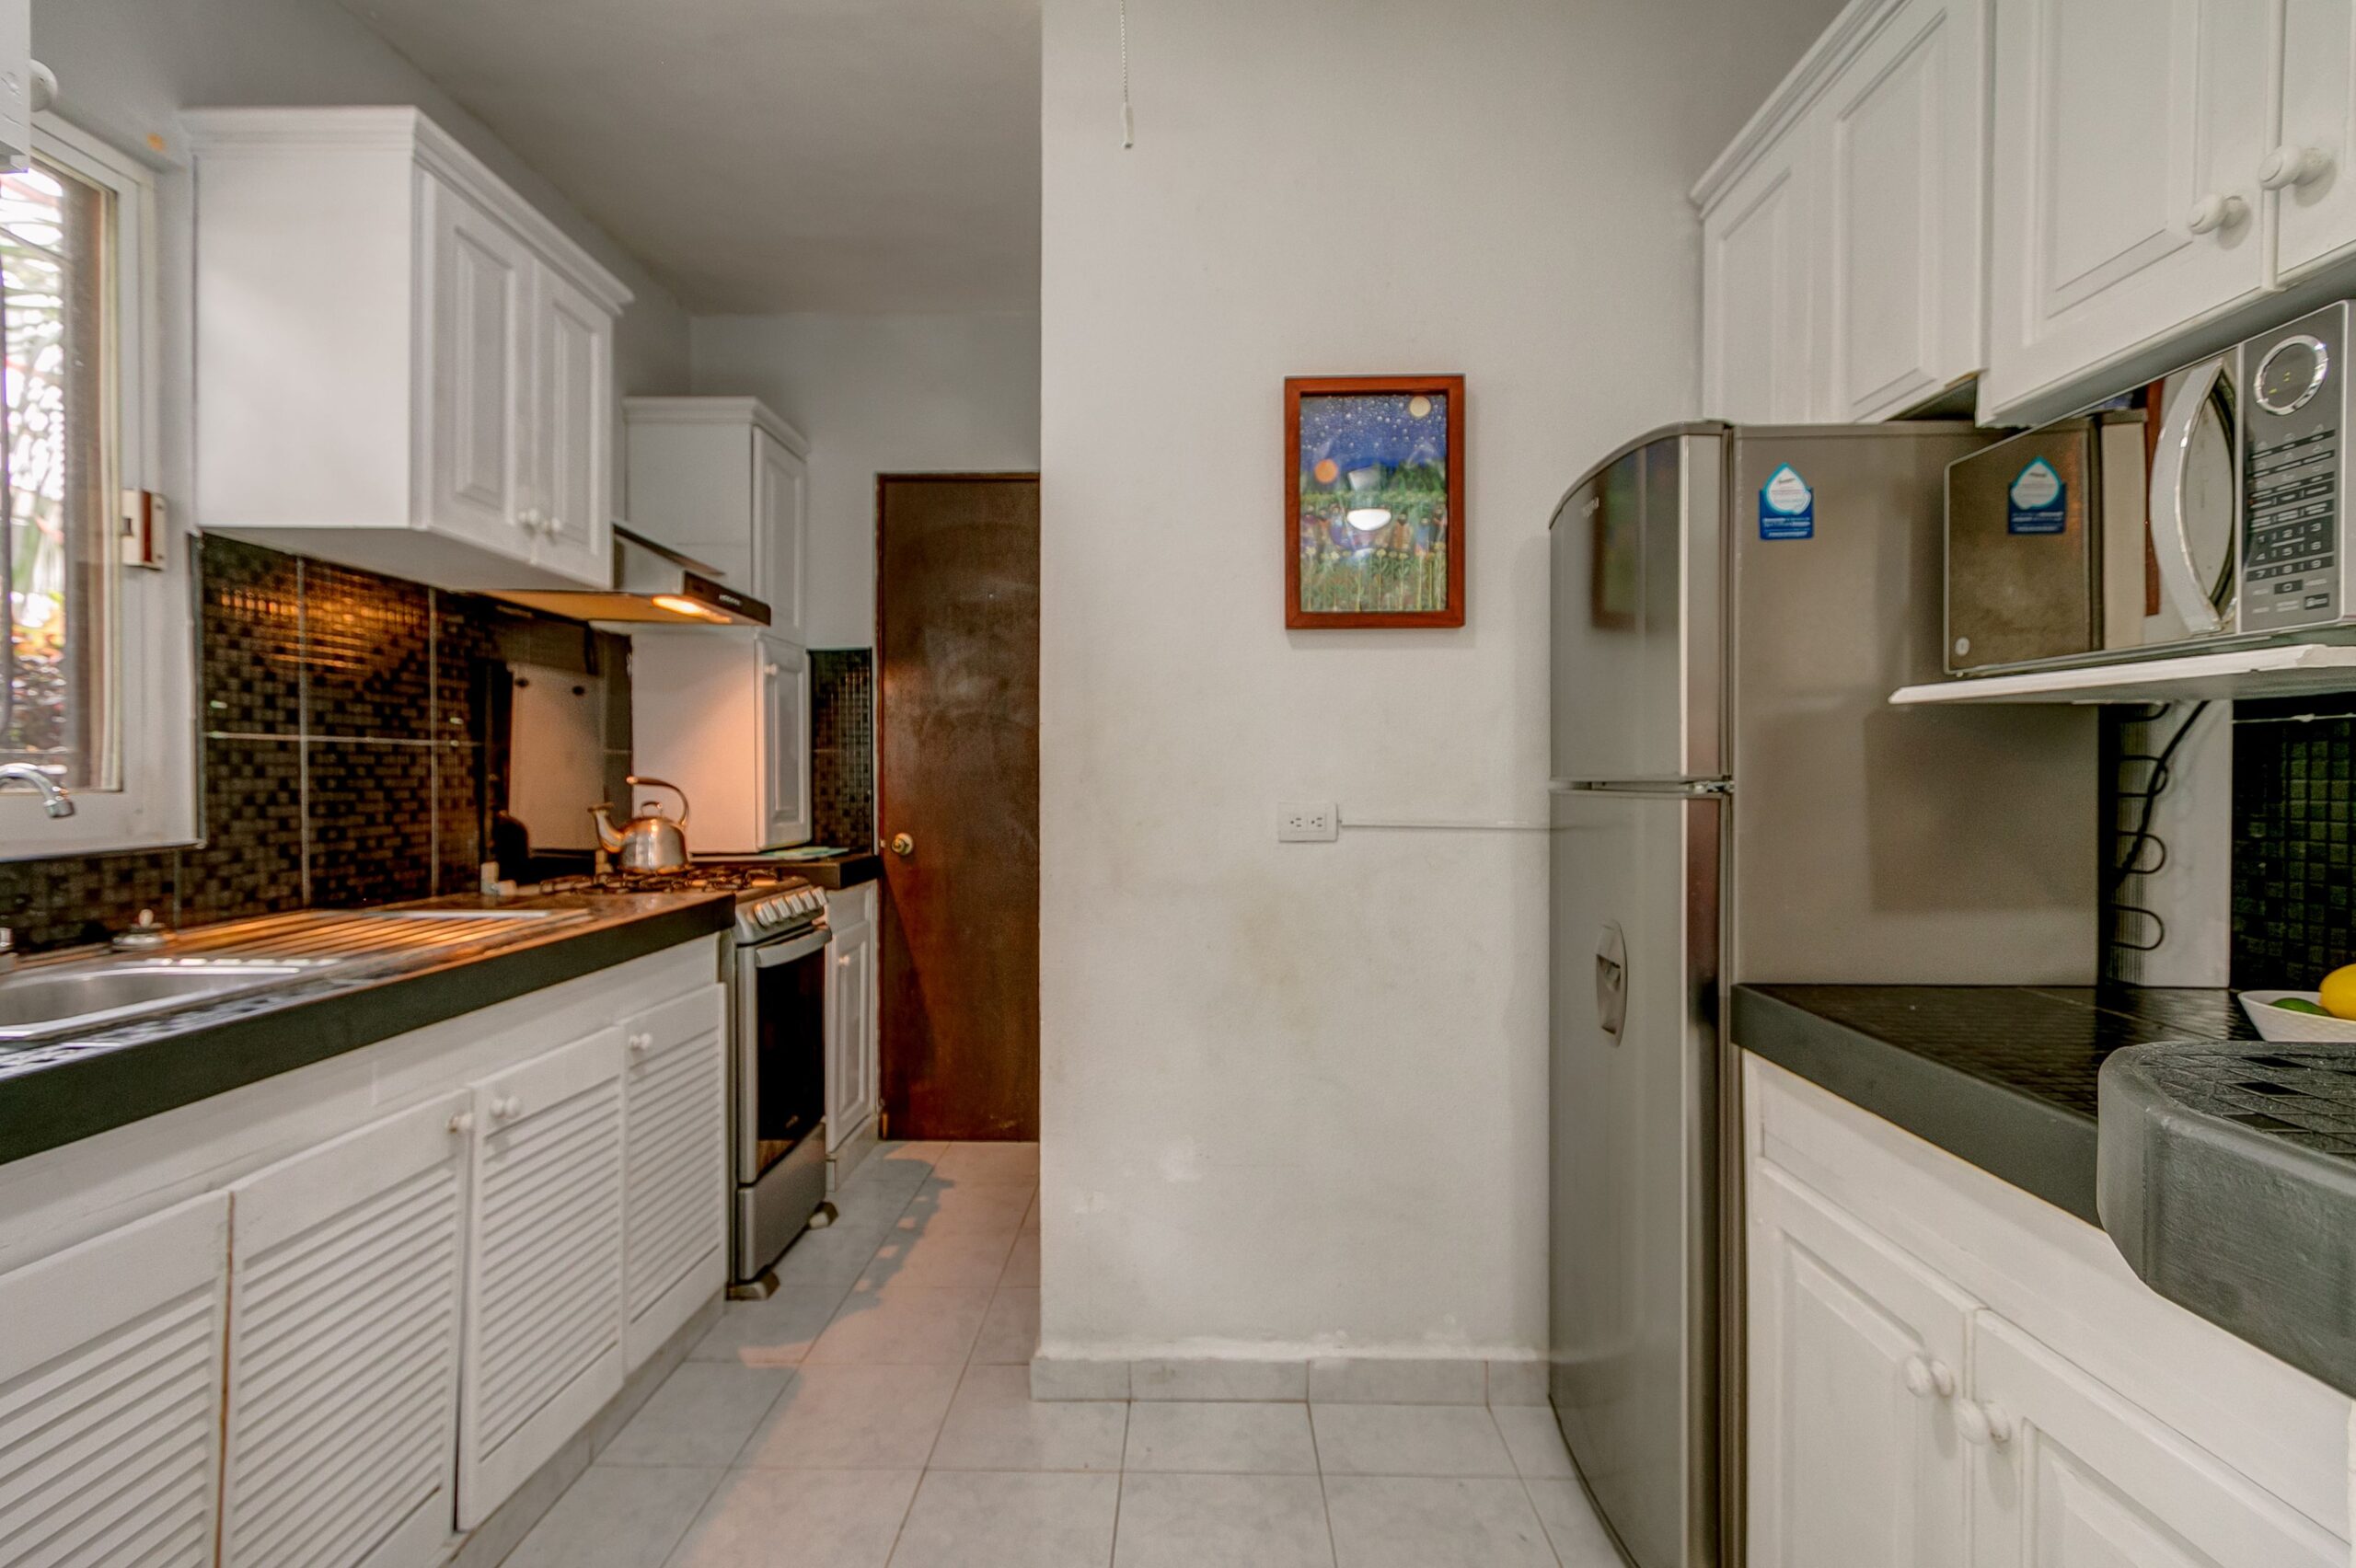 d apartment for sale in playacar gaviotas equipped kitchen